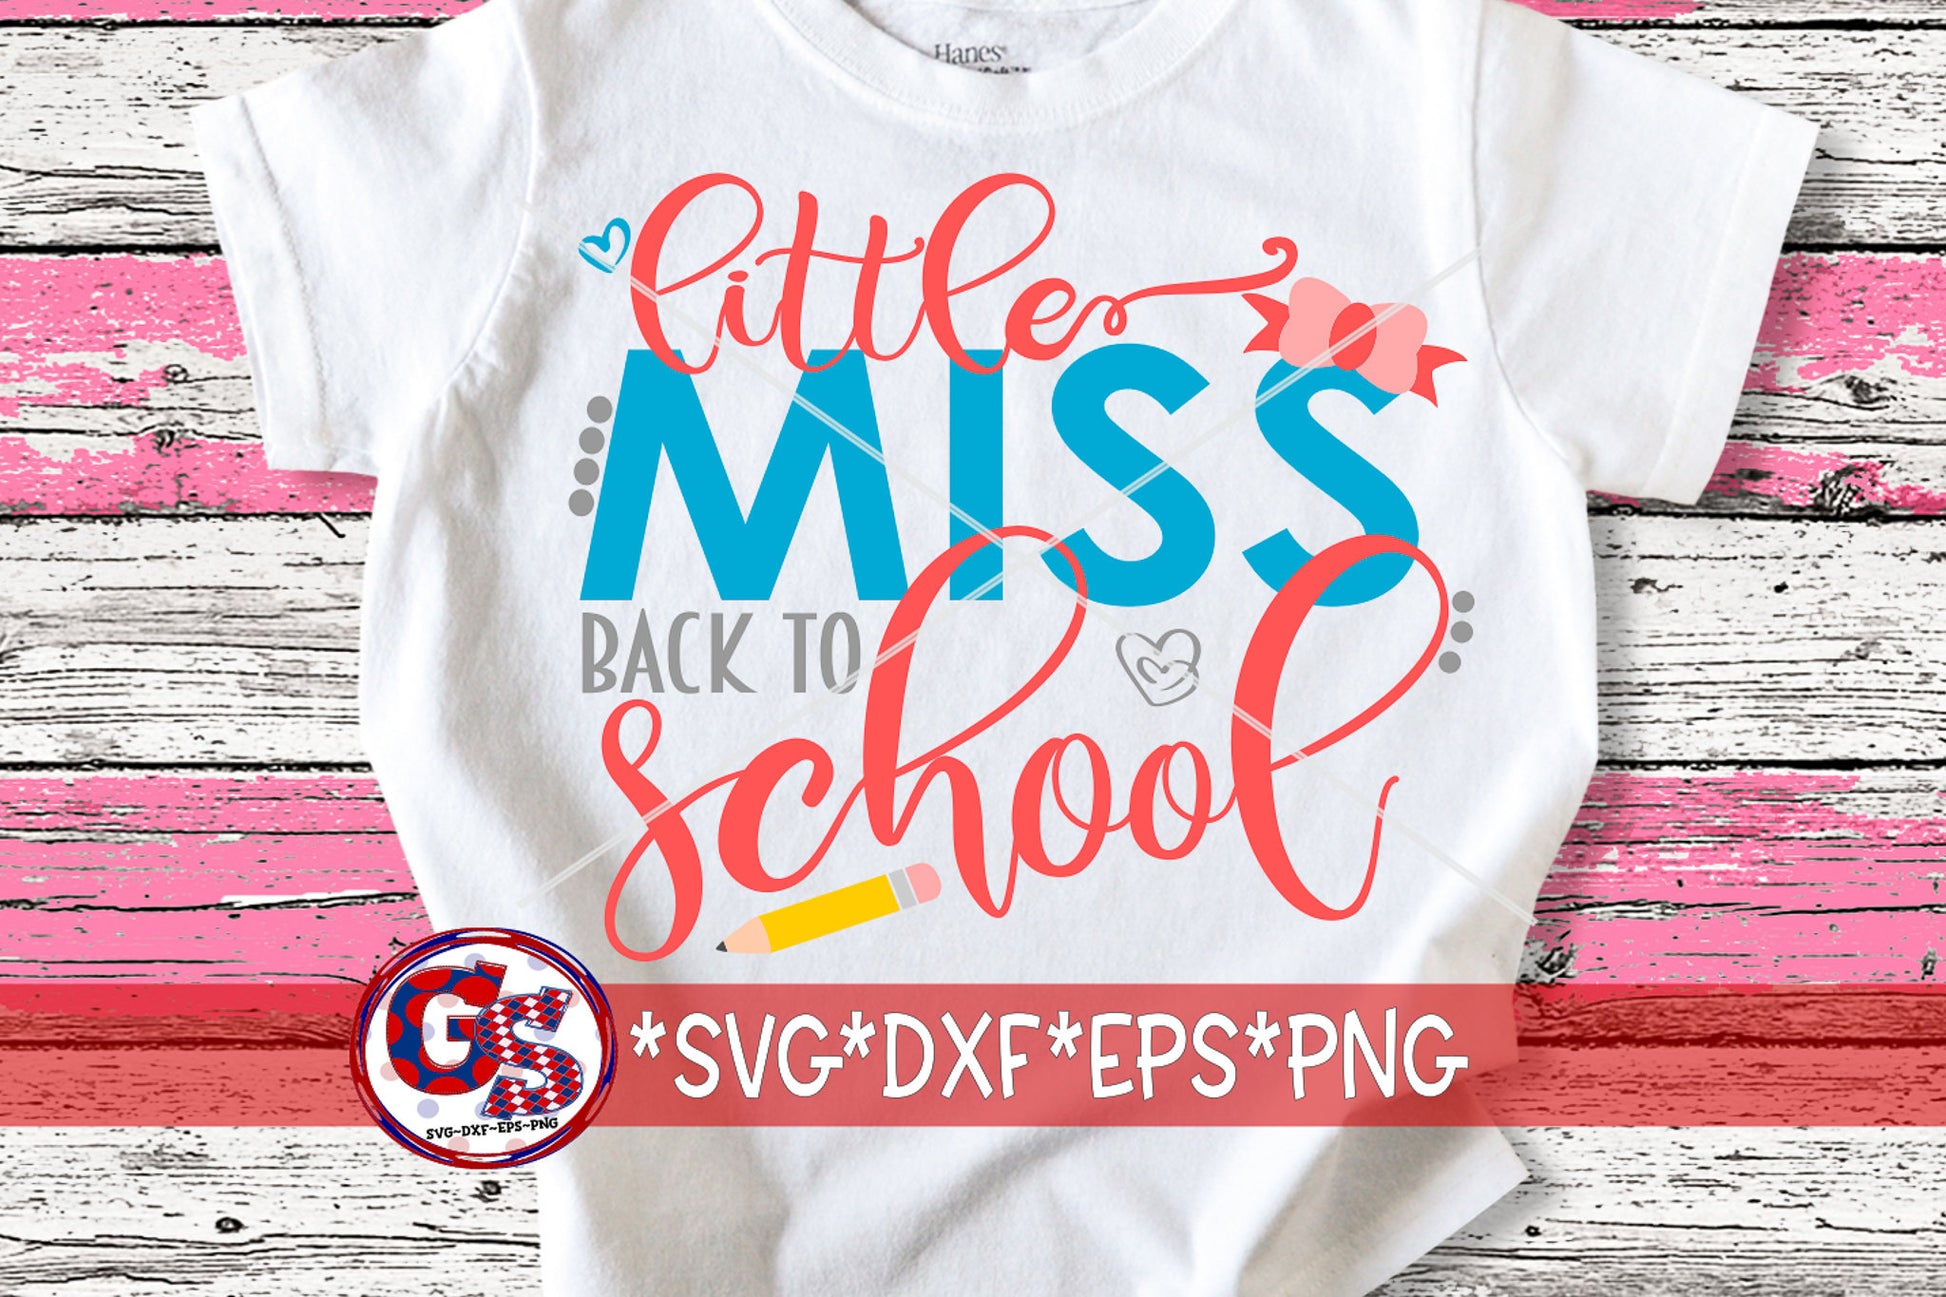 Little Miss Back To School SvG | Back To School SVG | Little Miss svg, dxf, eps, png. Back To School DxF | Instant Download Cut Files